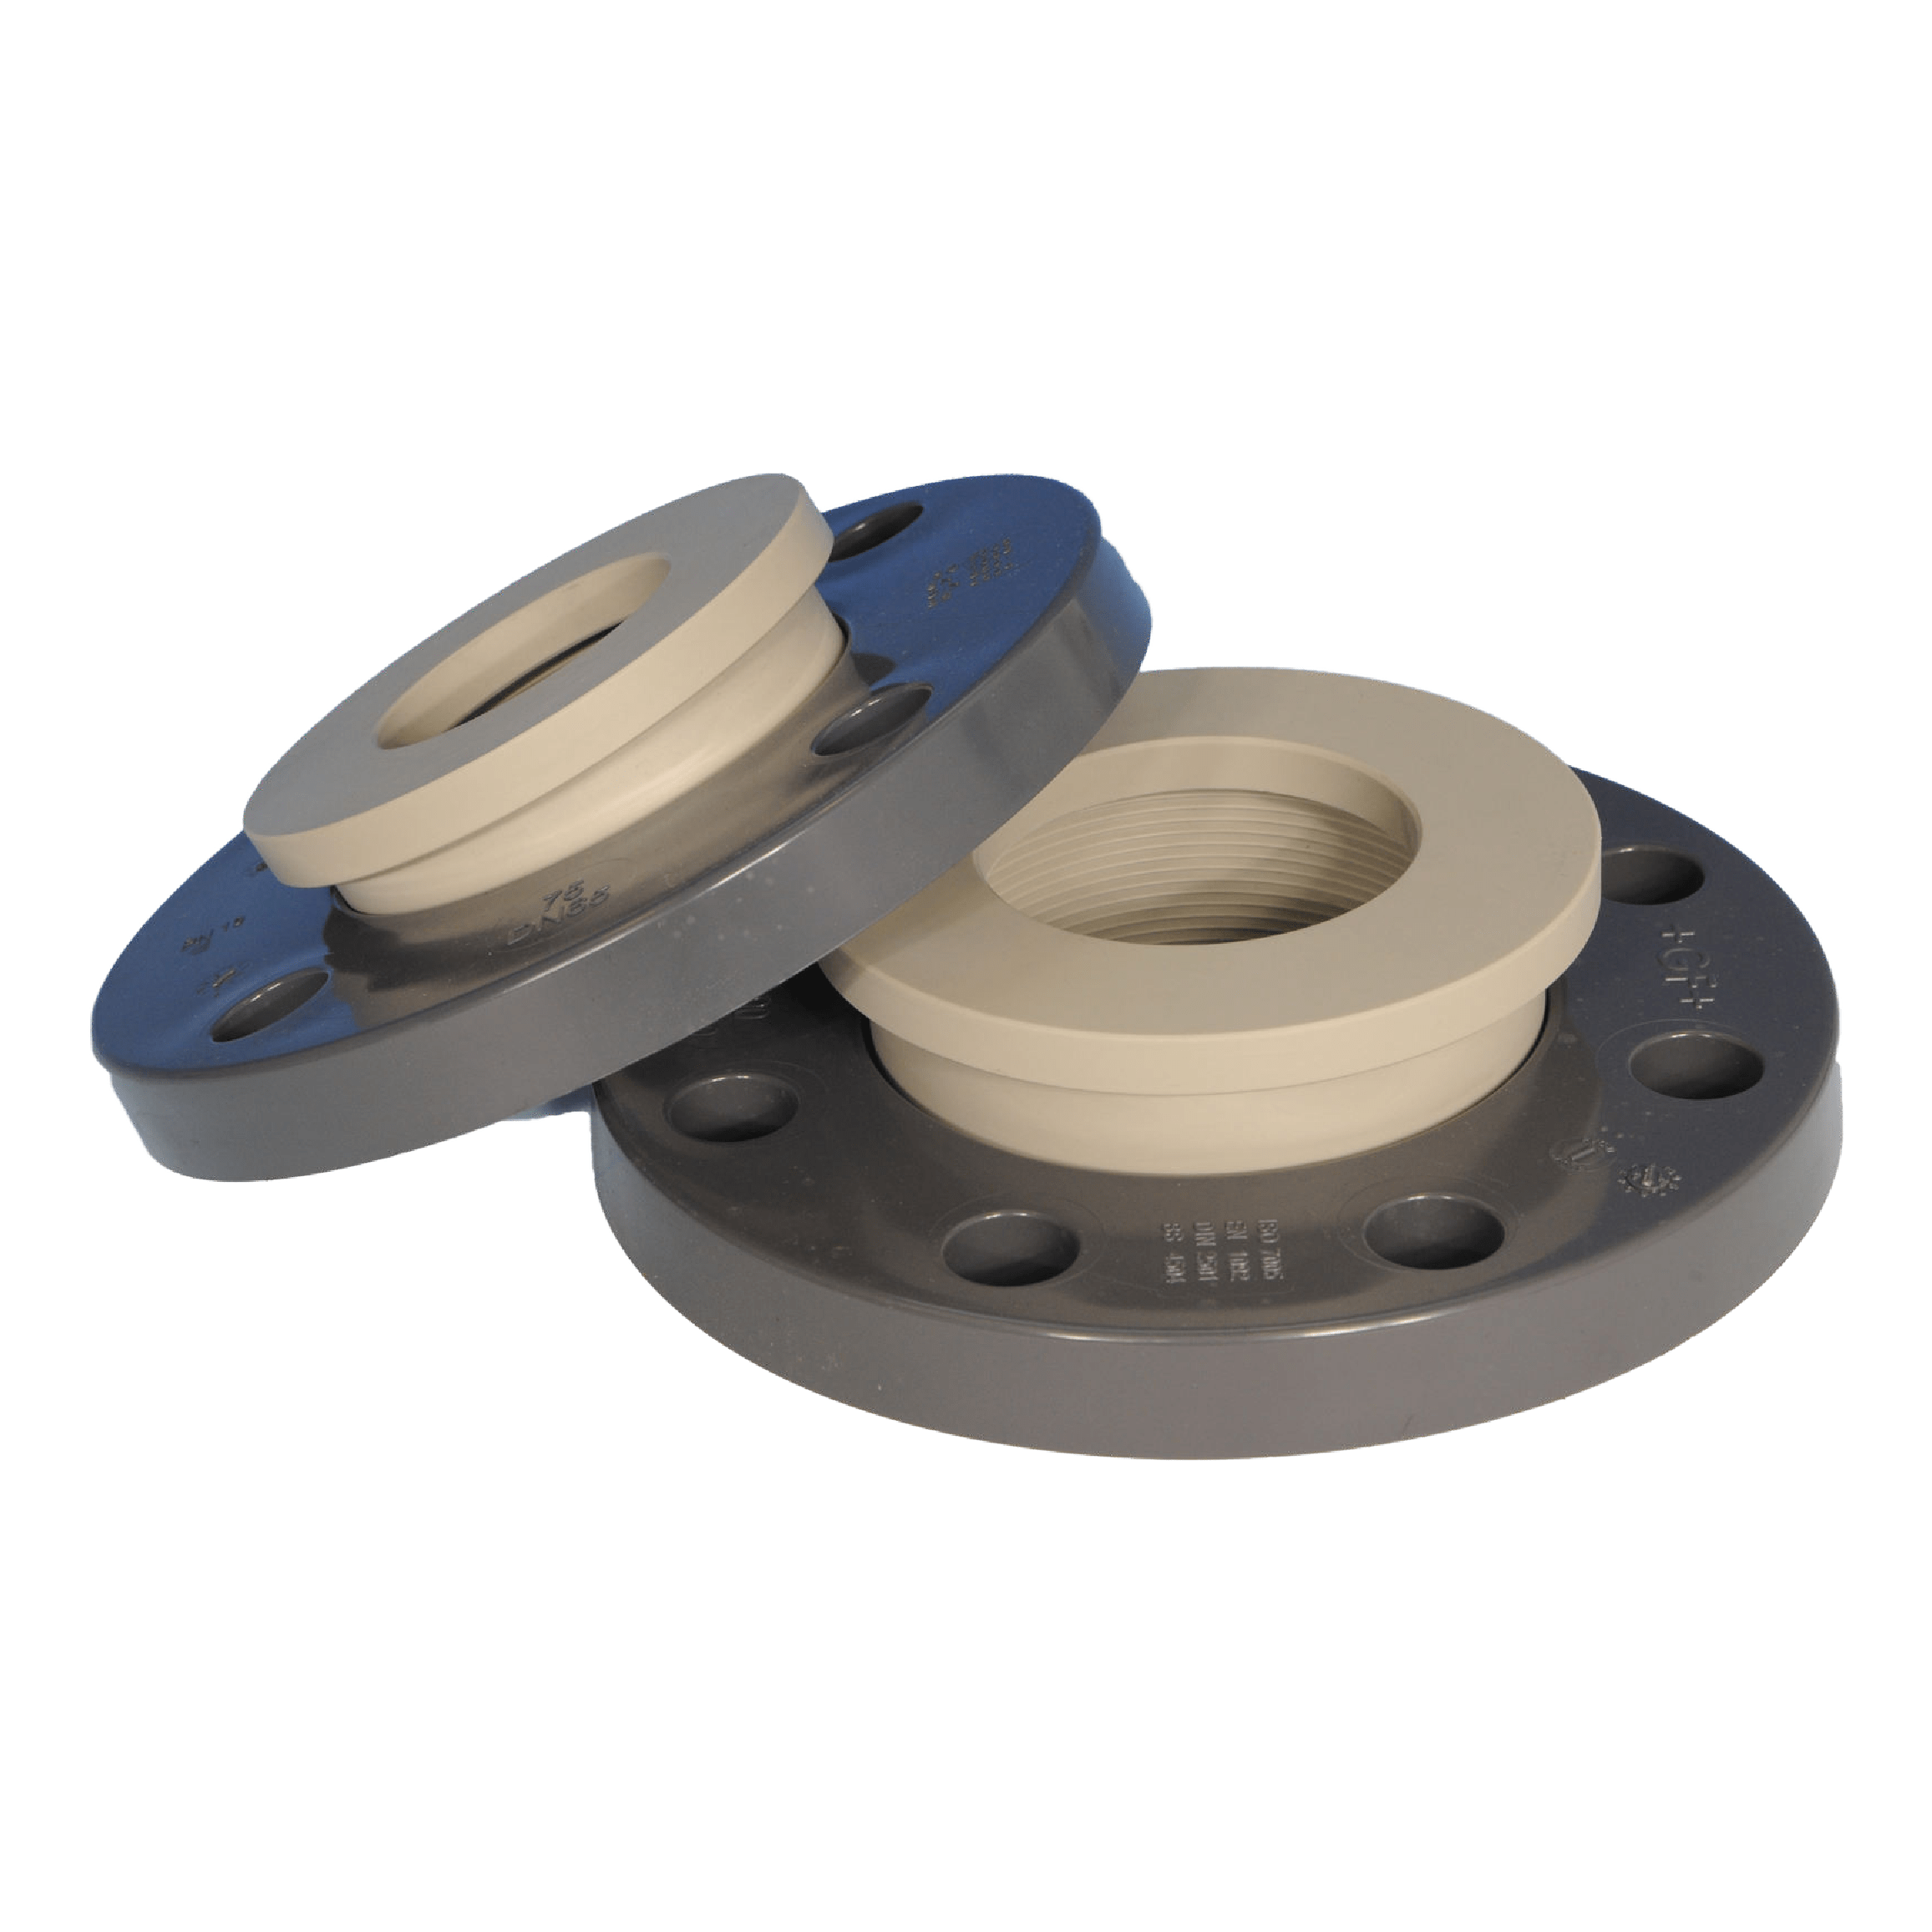 DIN or ANSI flanges for plastic (PP/PVDF) and metallic (AISI316) pumps